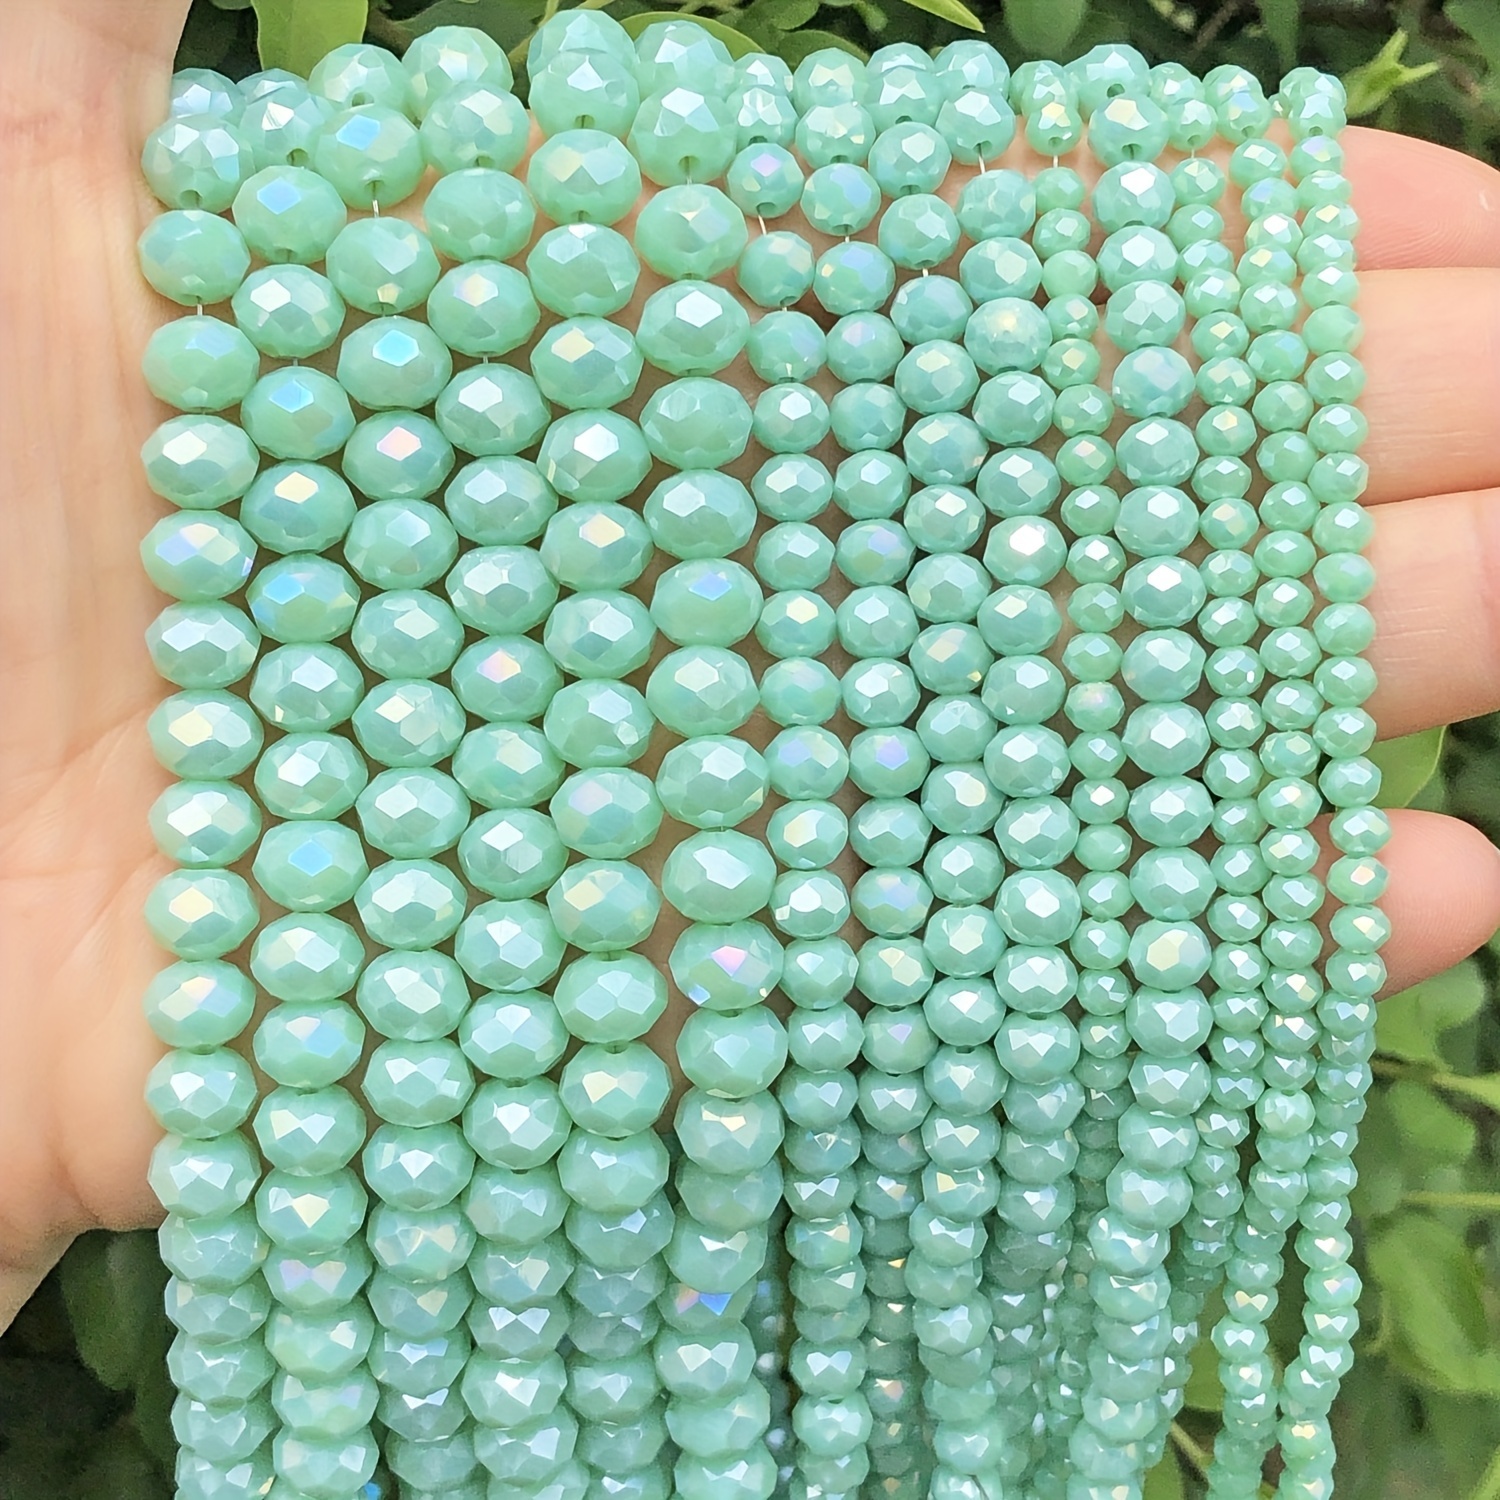 

4/6/8mm Upscale Ab Mint Green Austrian Crystal Glass Faceted Rondelle Loose Spacer Beads For Diy Earrings Bracelet Necklace Jewelry Making Craft Supplies